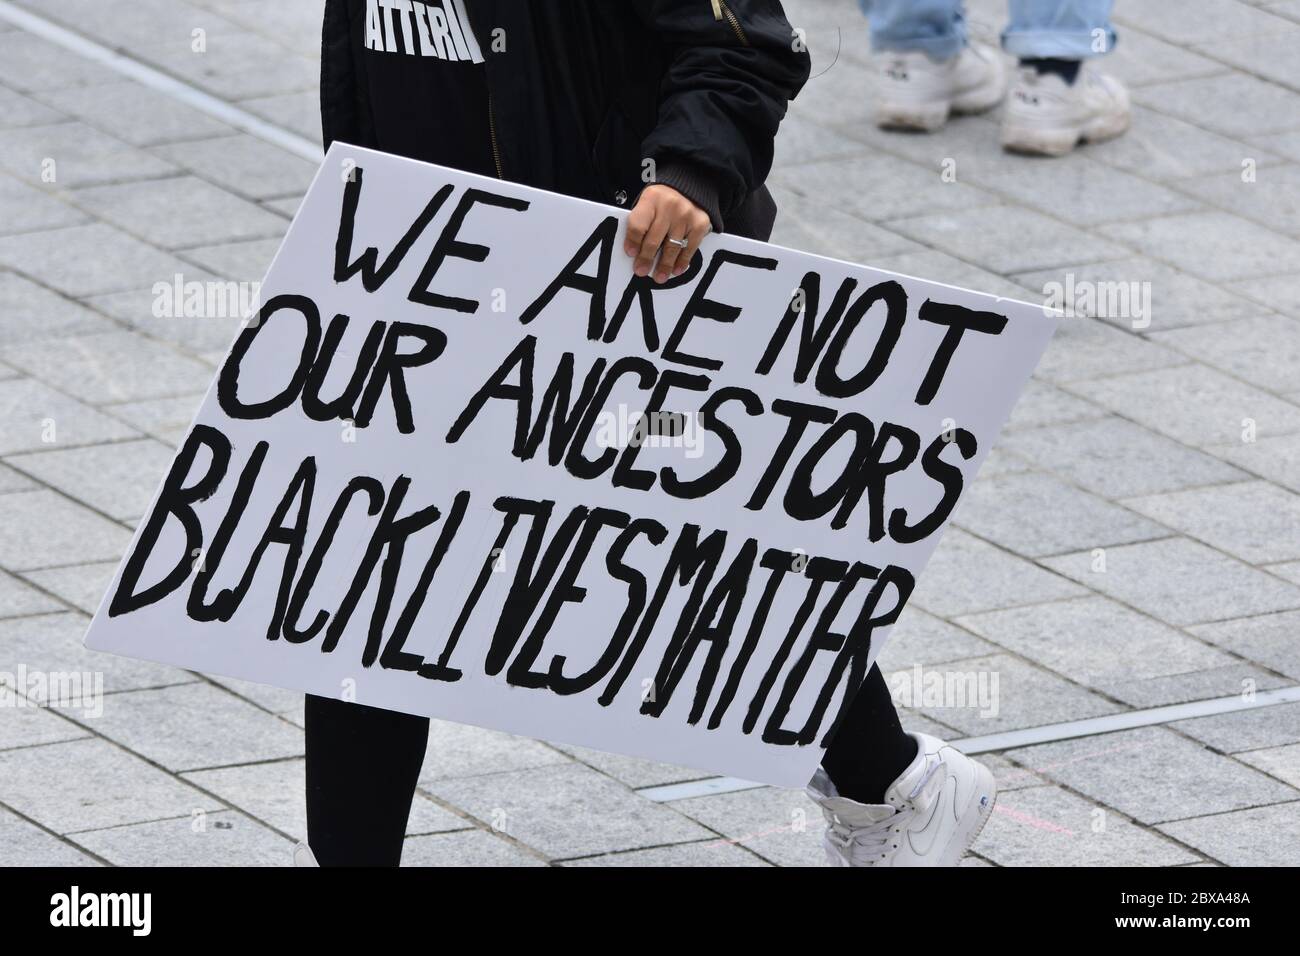 A protest sign that reads 'We Are Not Our Ancestors' being carried by an anti racism protester at a Black Lives Matter demonstration in the UK in 2020 Stock Photo